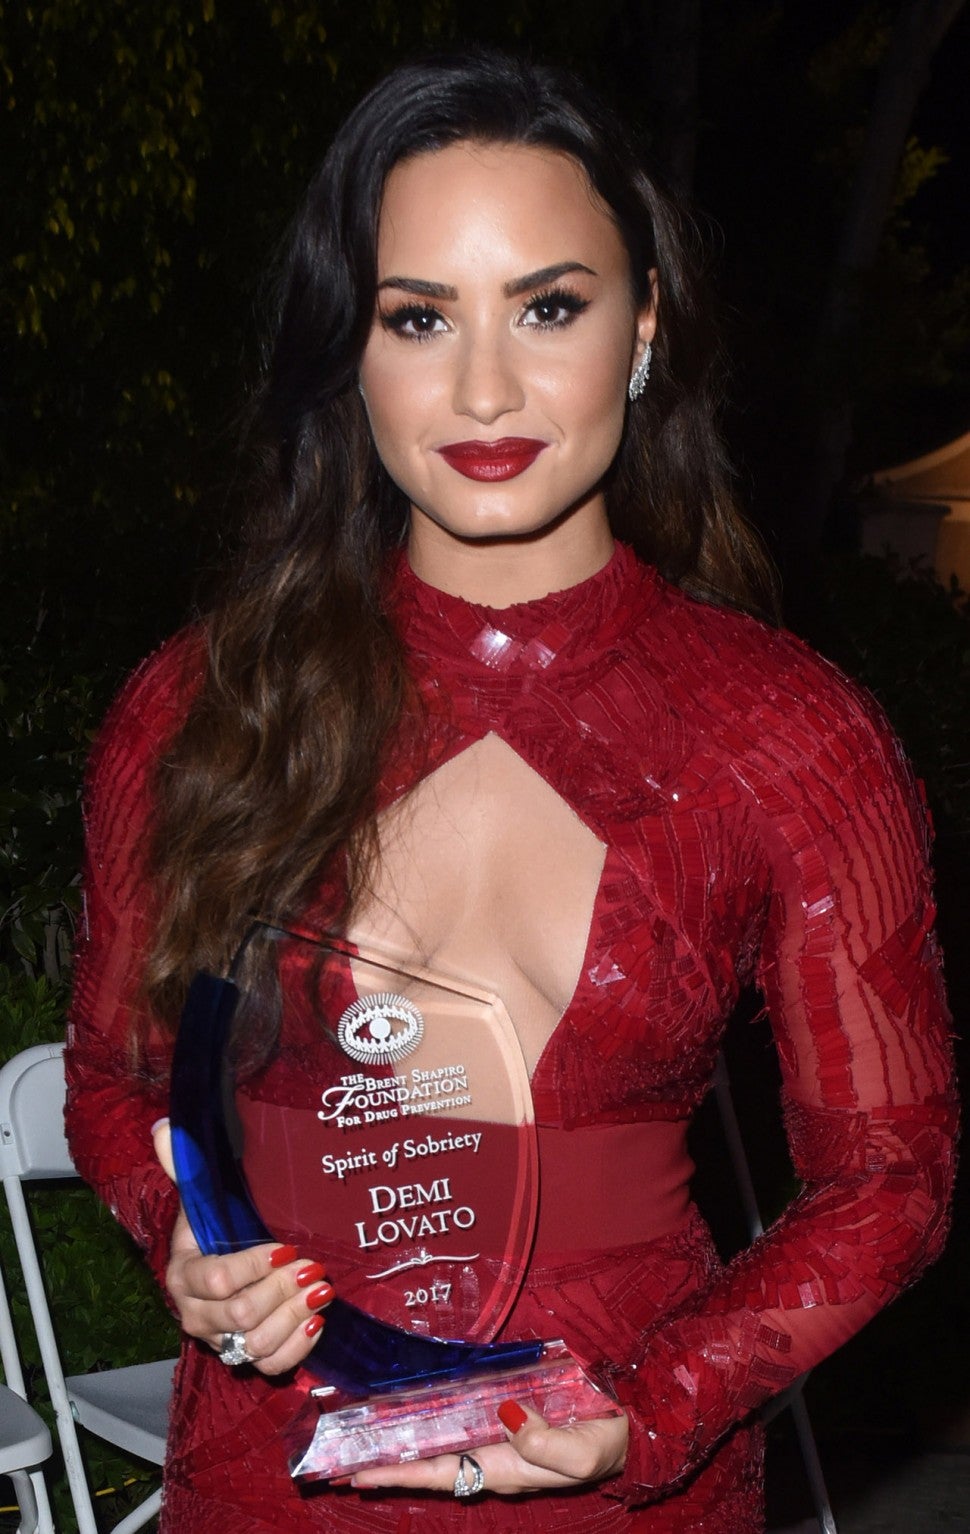 Demi Lovato is honored for her sobriety